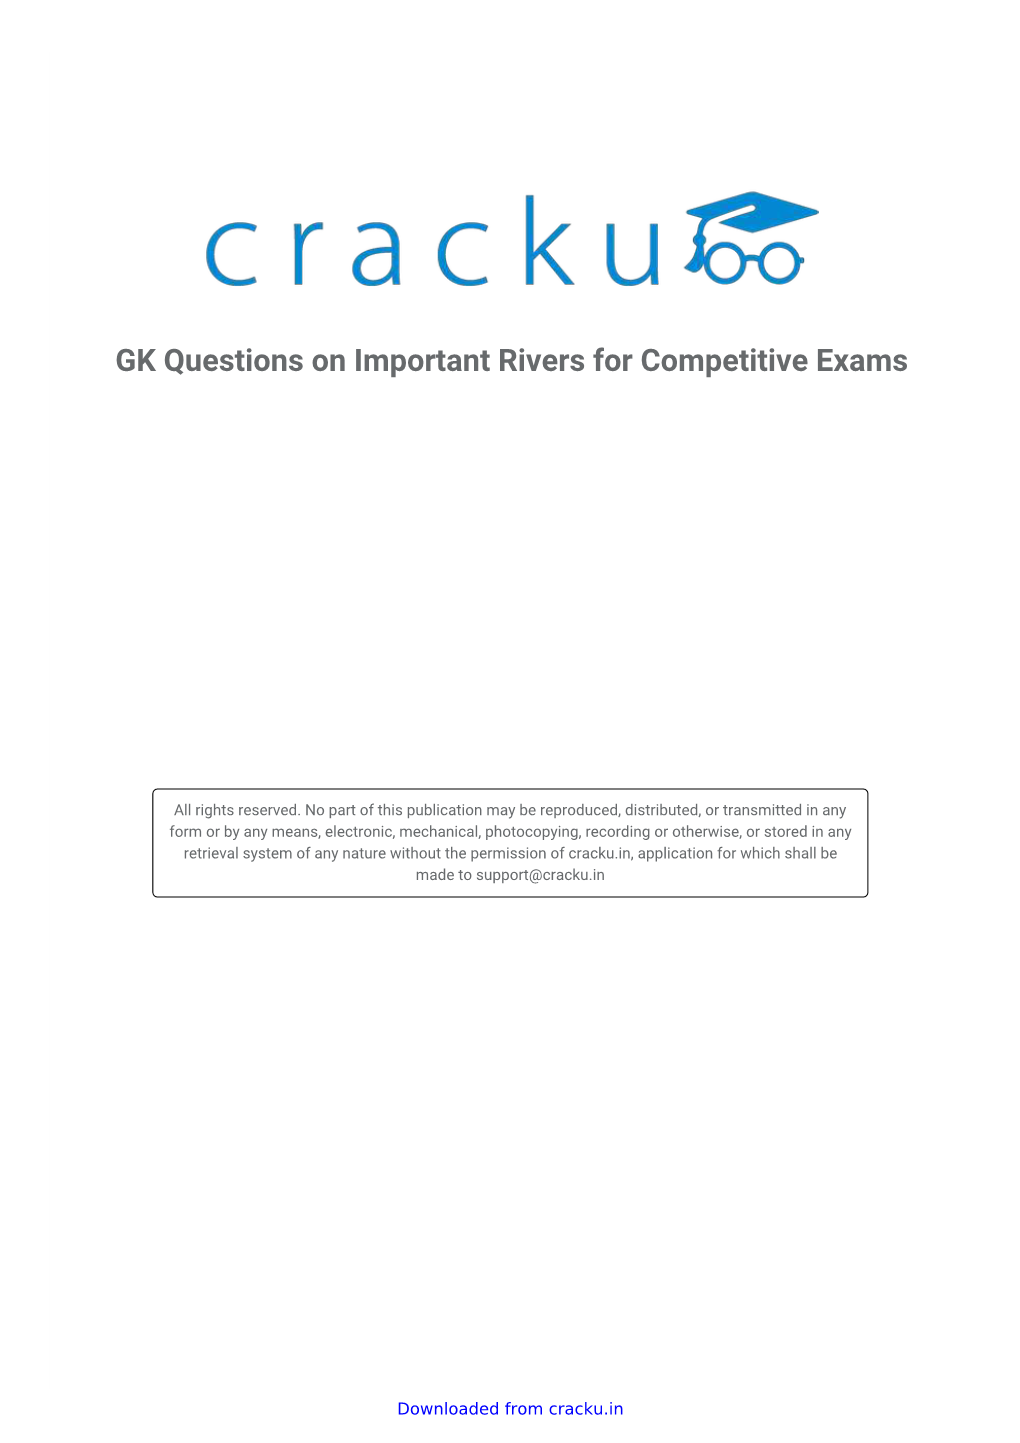 Download GK Questions on Important Rivers for Competitive Exams